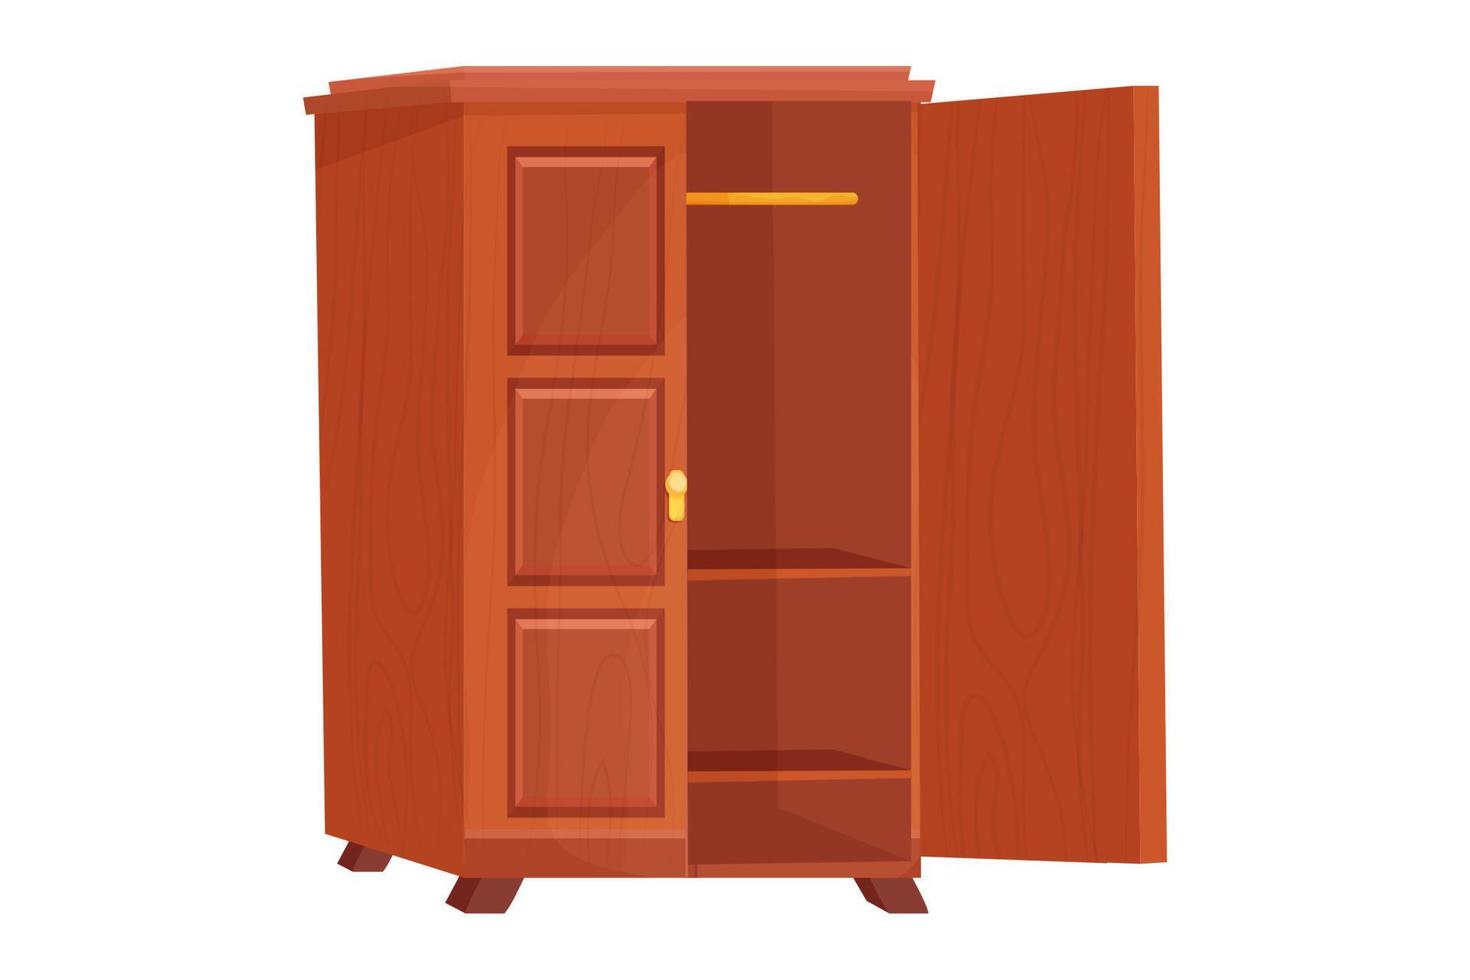 Wooden wardrobe empty furniture with shelf in cartoon style isolated on white background. Cupboard, drawer interior object. Vector illustration